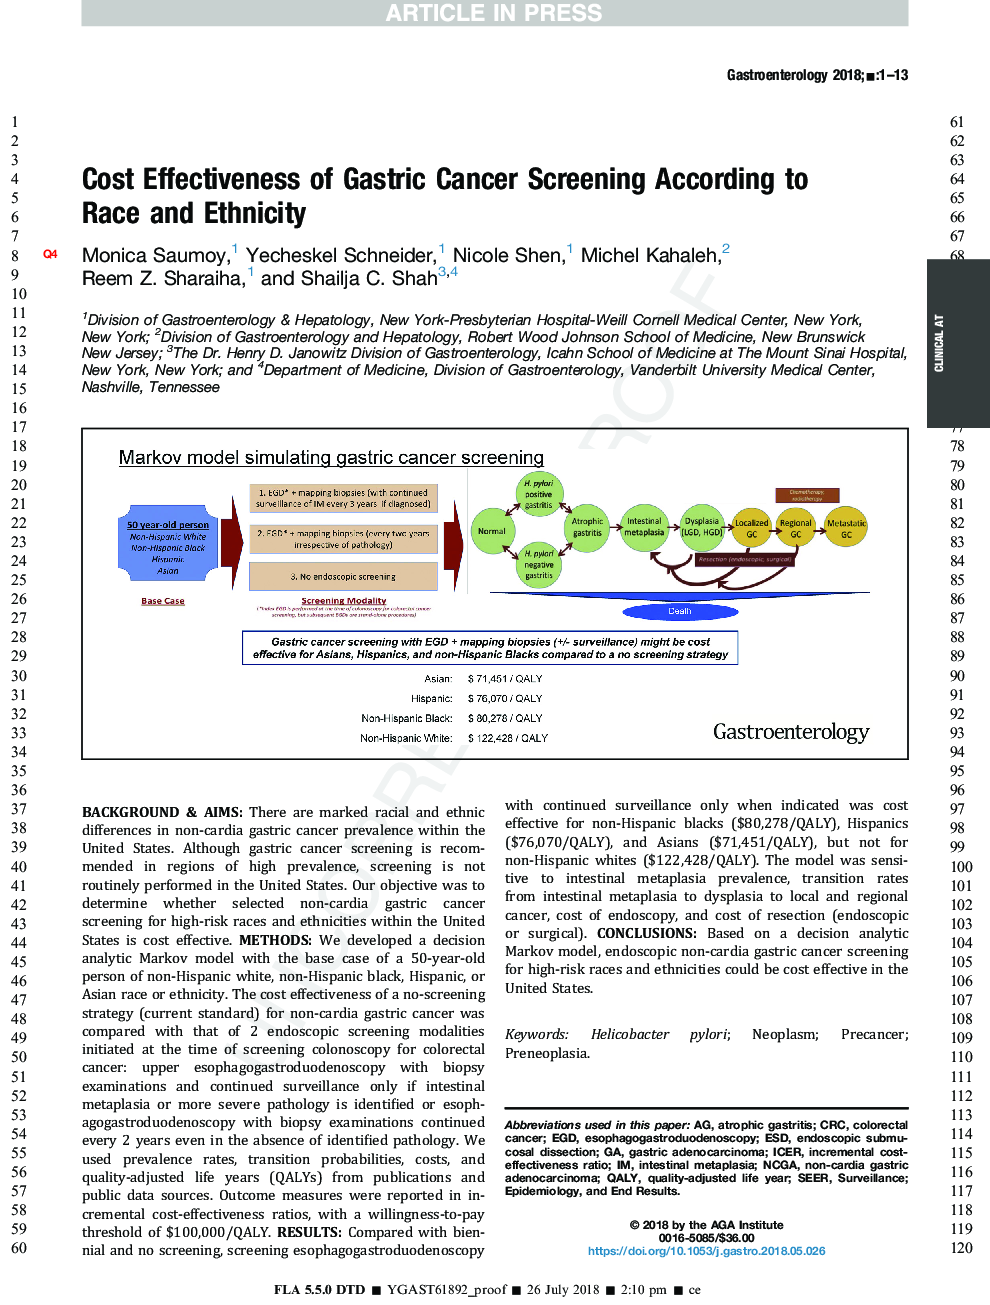 Cost Effectiveness of Gastric Cancer Screening According to Race and Ethnicity